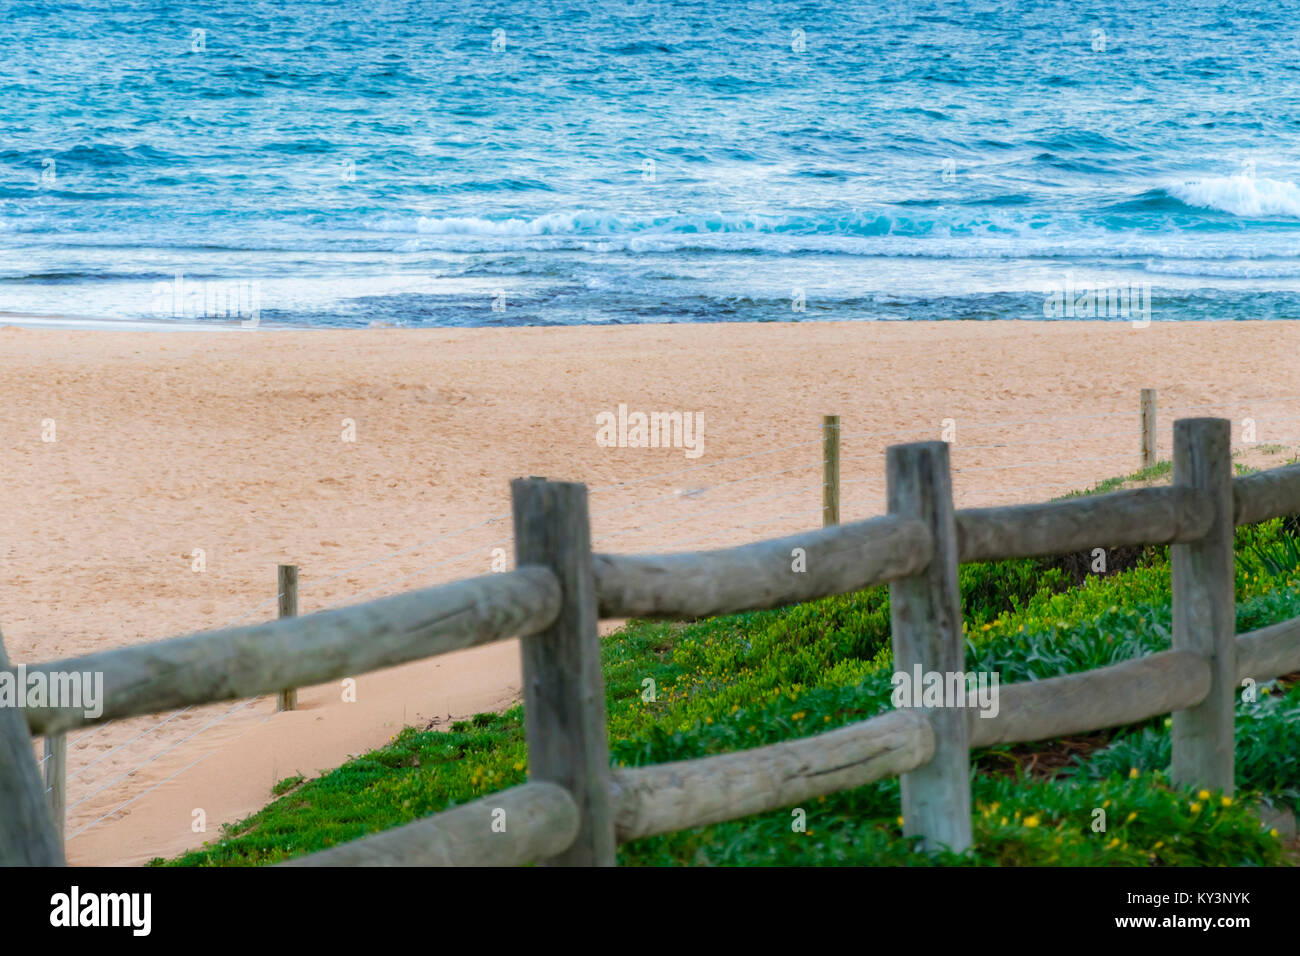 Scenic view of abandoned sandy beach and ocean waves, wooden fence in foreground. Empty Mona Vale beach, Sydney northern beaches, Australia. Stock Photo